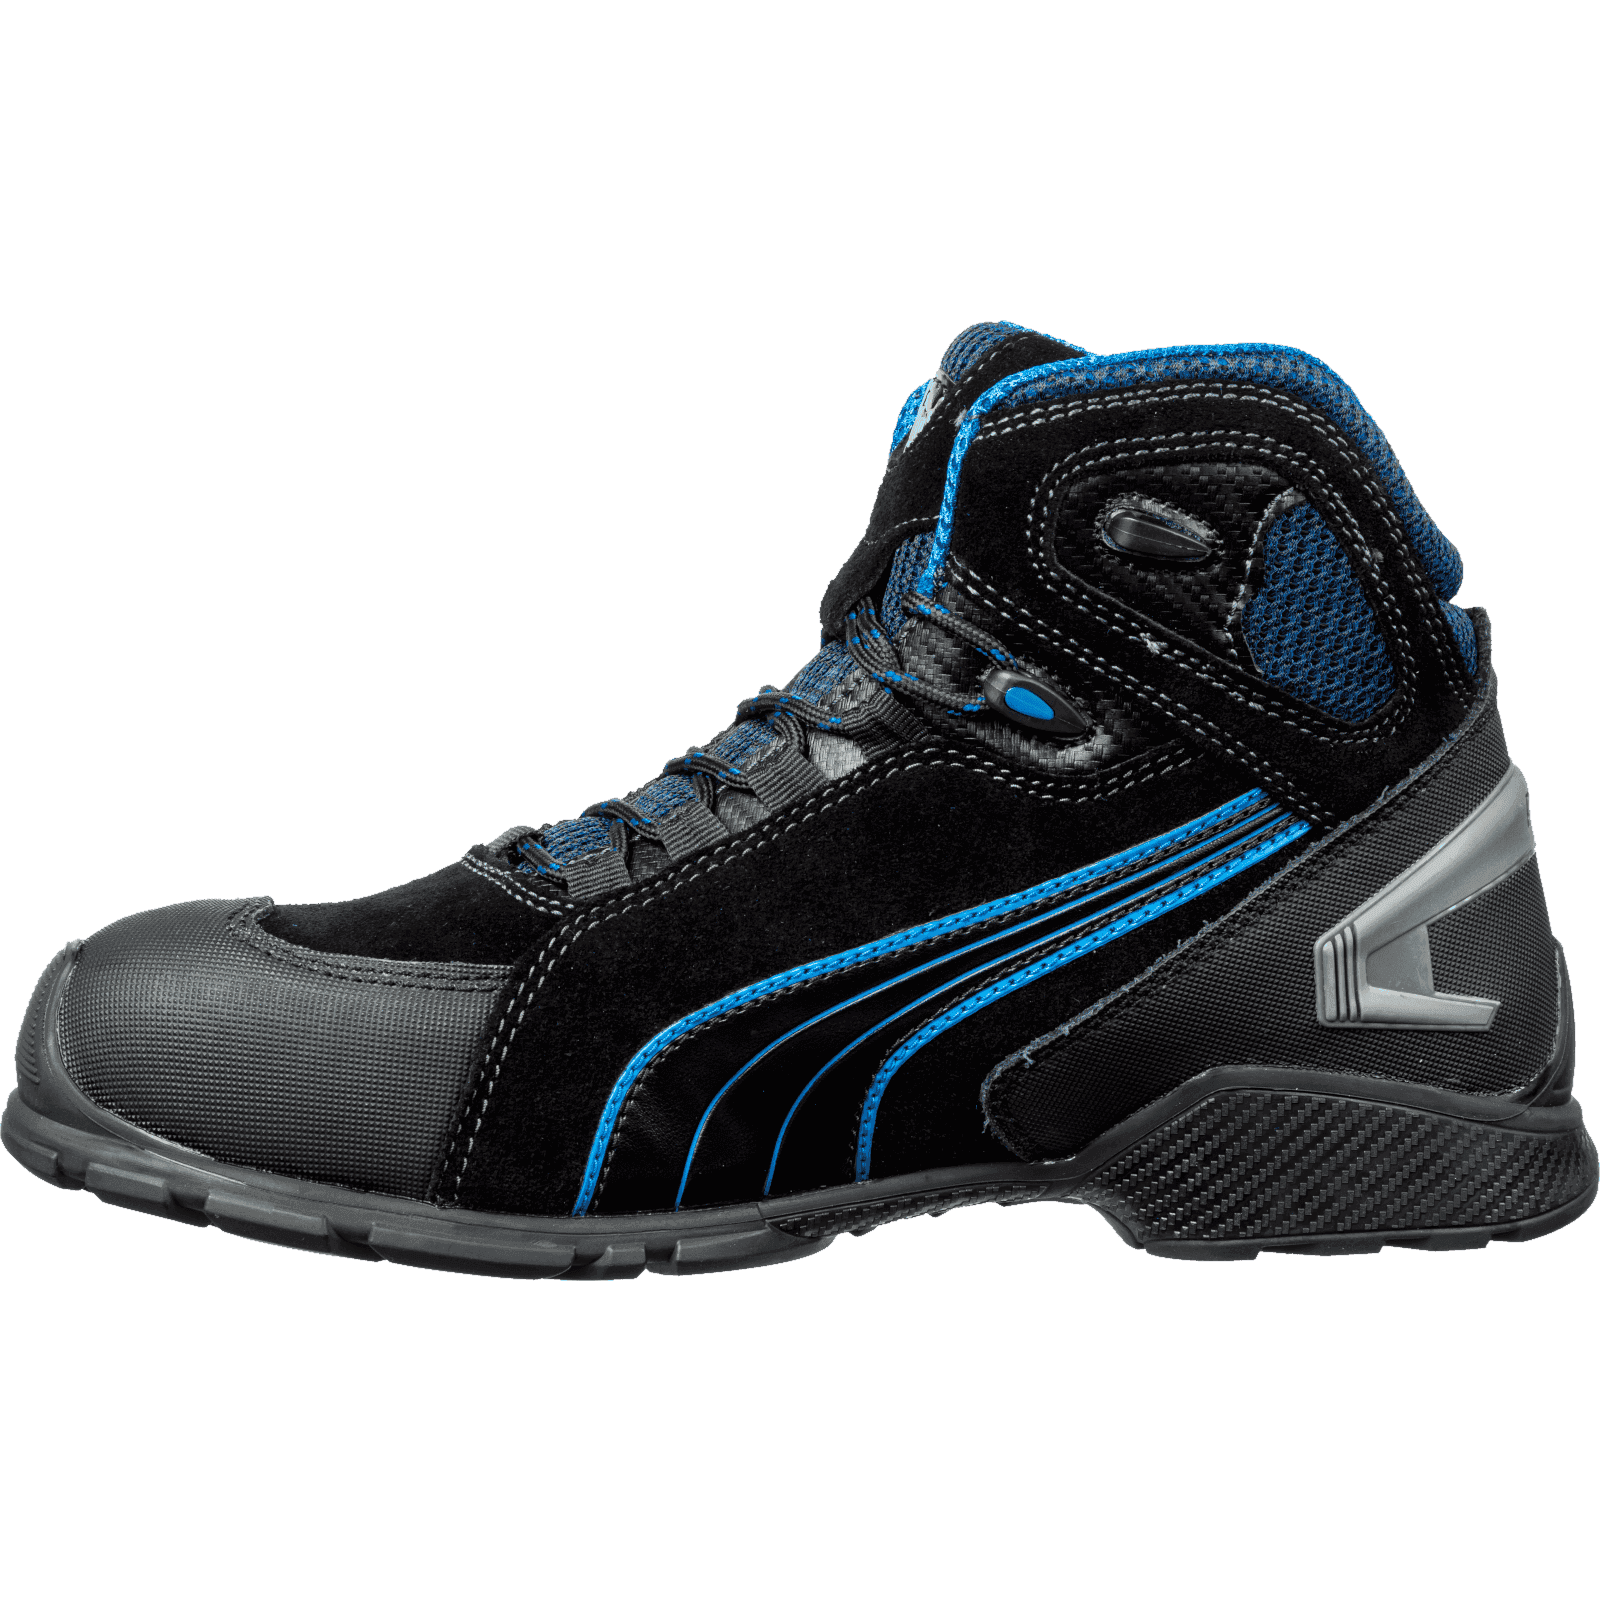 Rio Mid S3 Safety Boots Puma